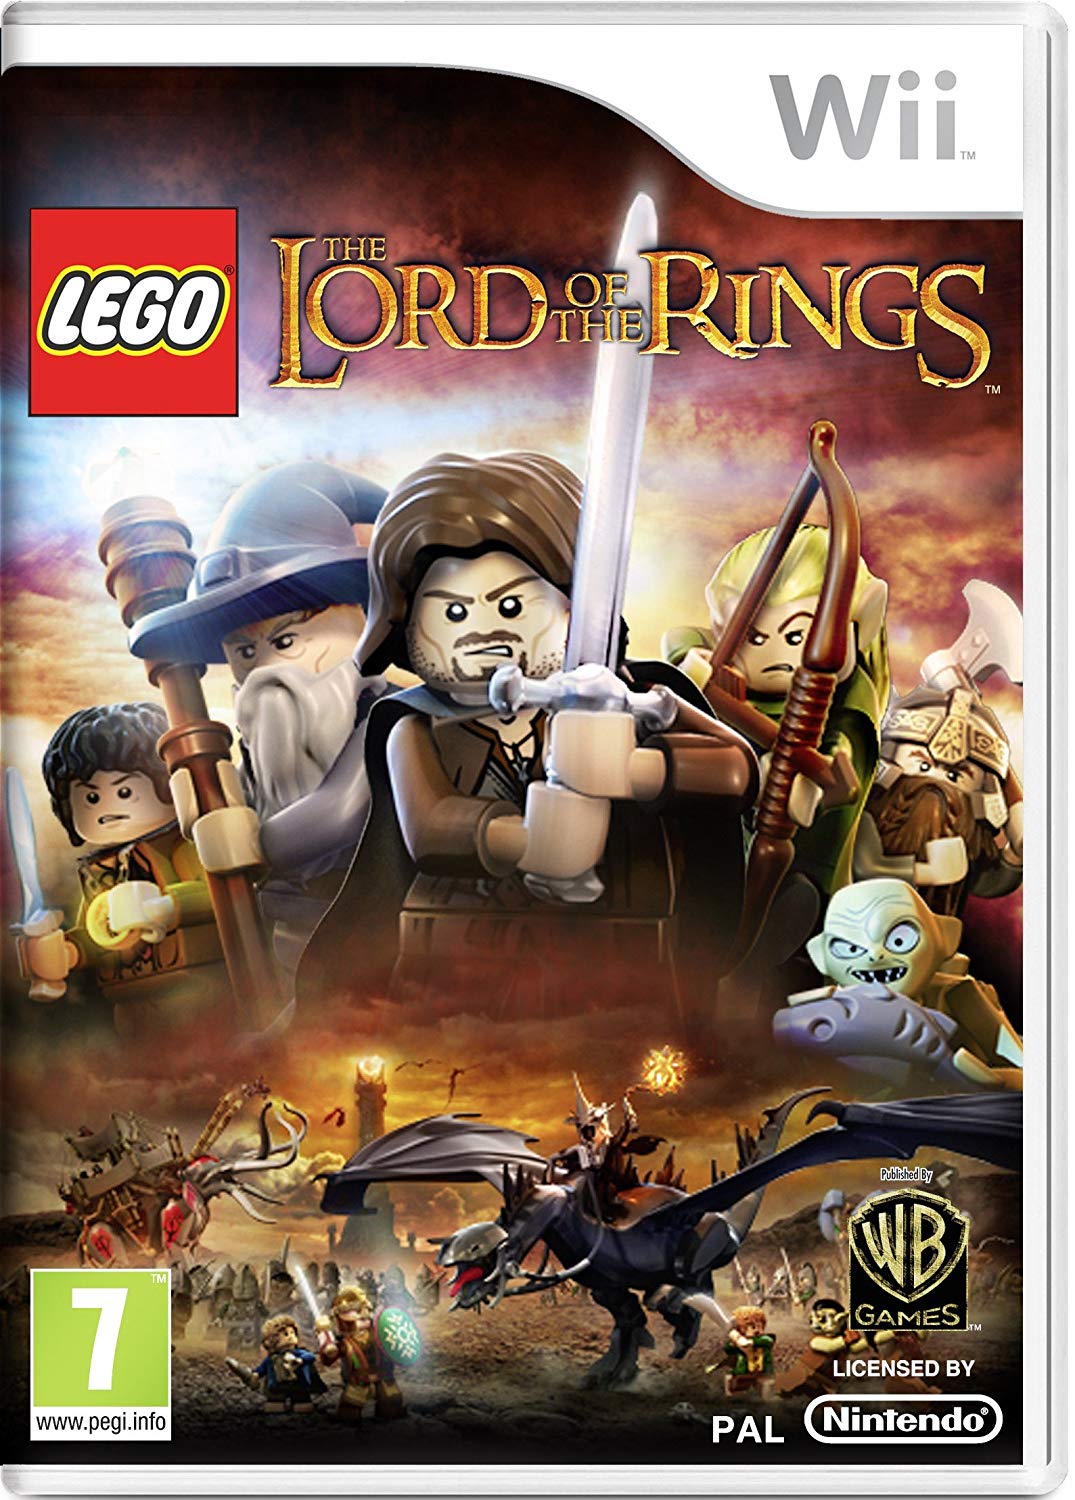 Lego The Lord of the Rings - Nintendo Wii Játékok